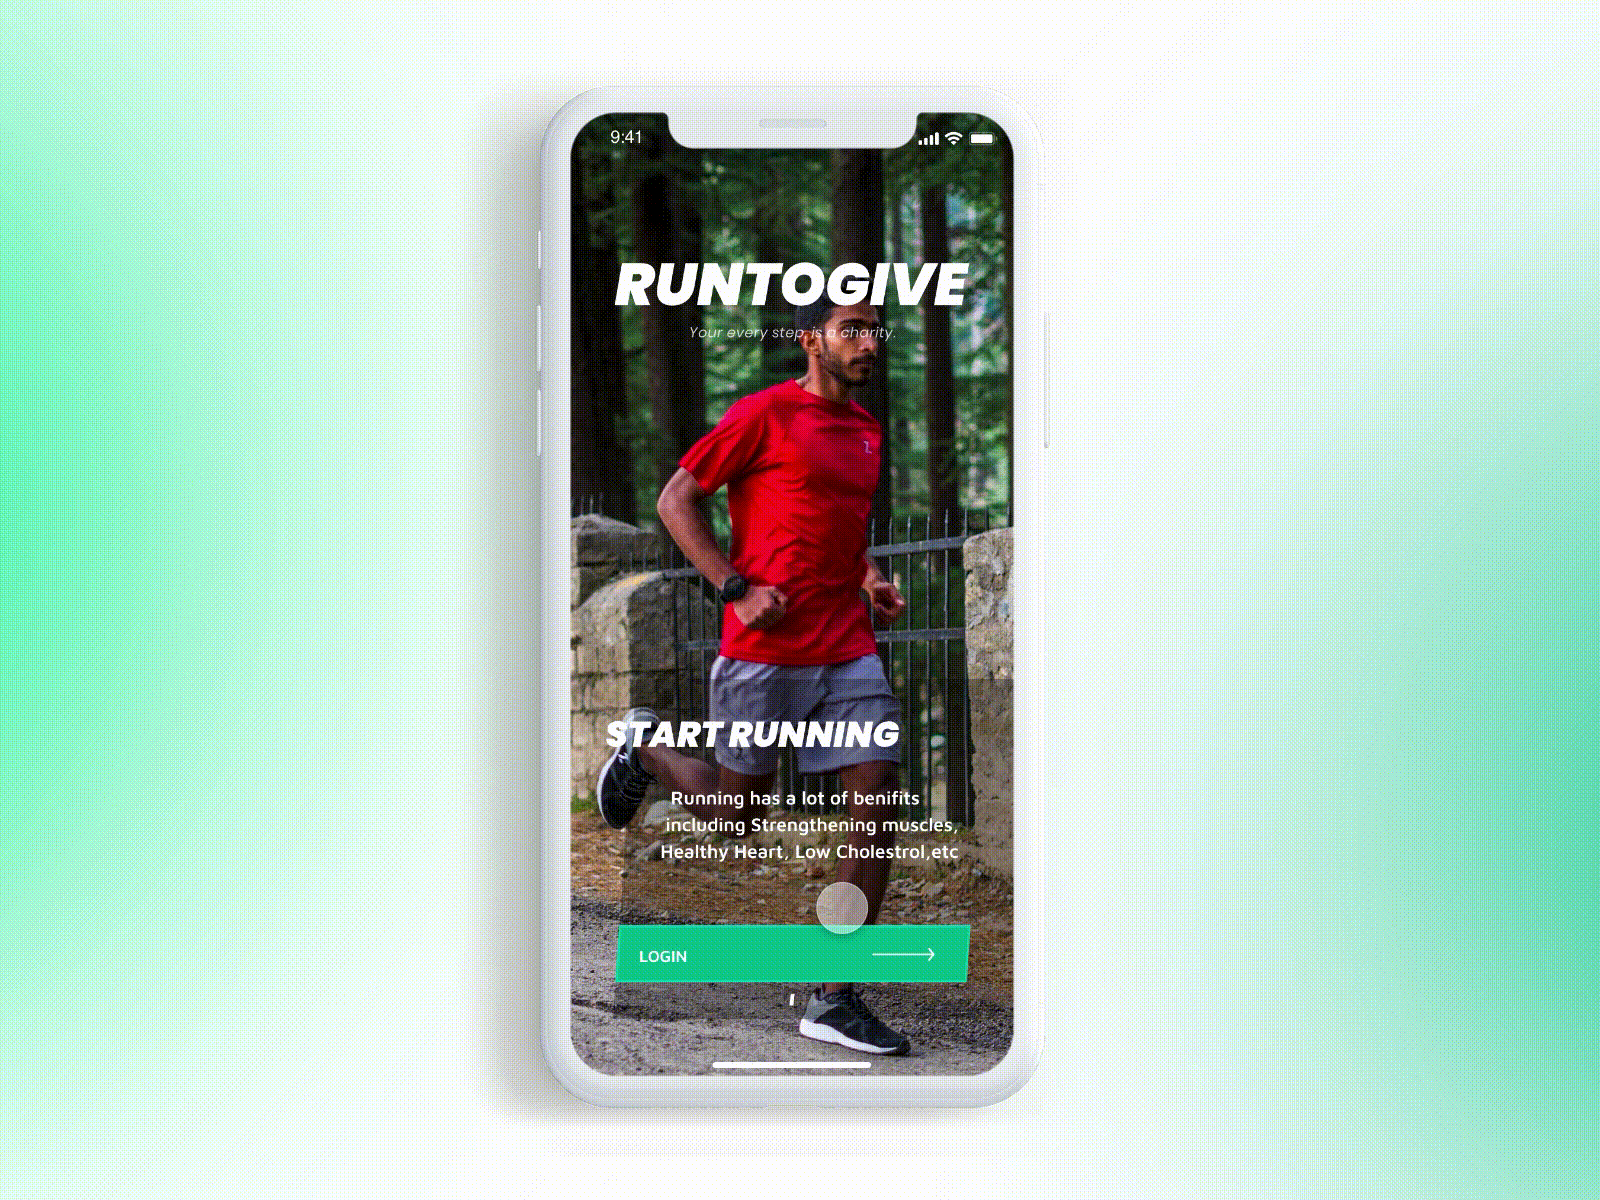 Runtogive - Fitness & Charity Platform communities motivate physical activity sedentary tech side ui user experience user interface ux